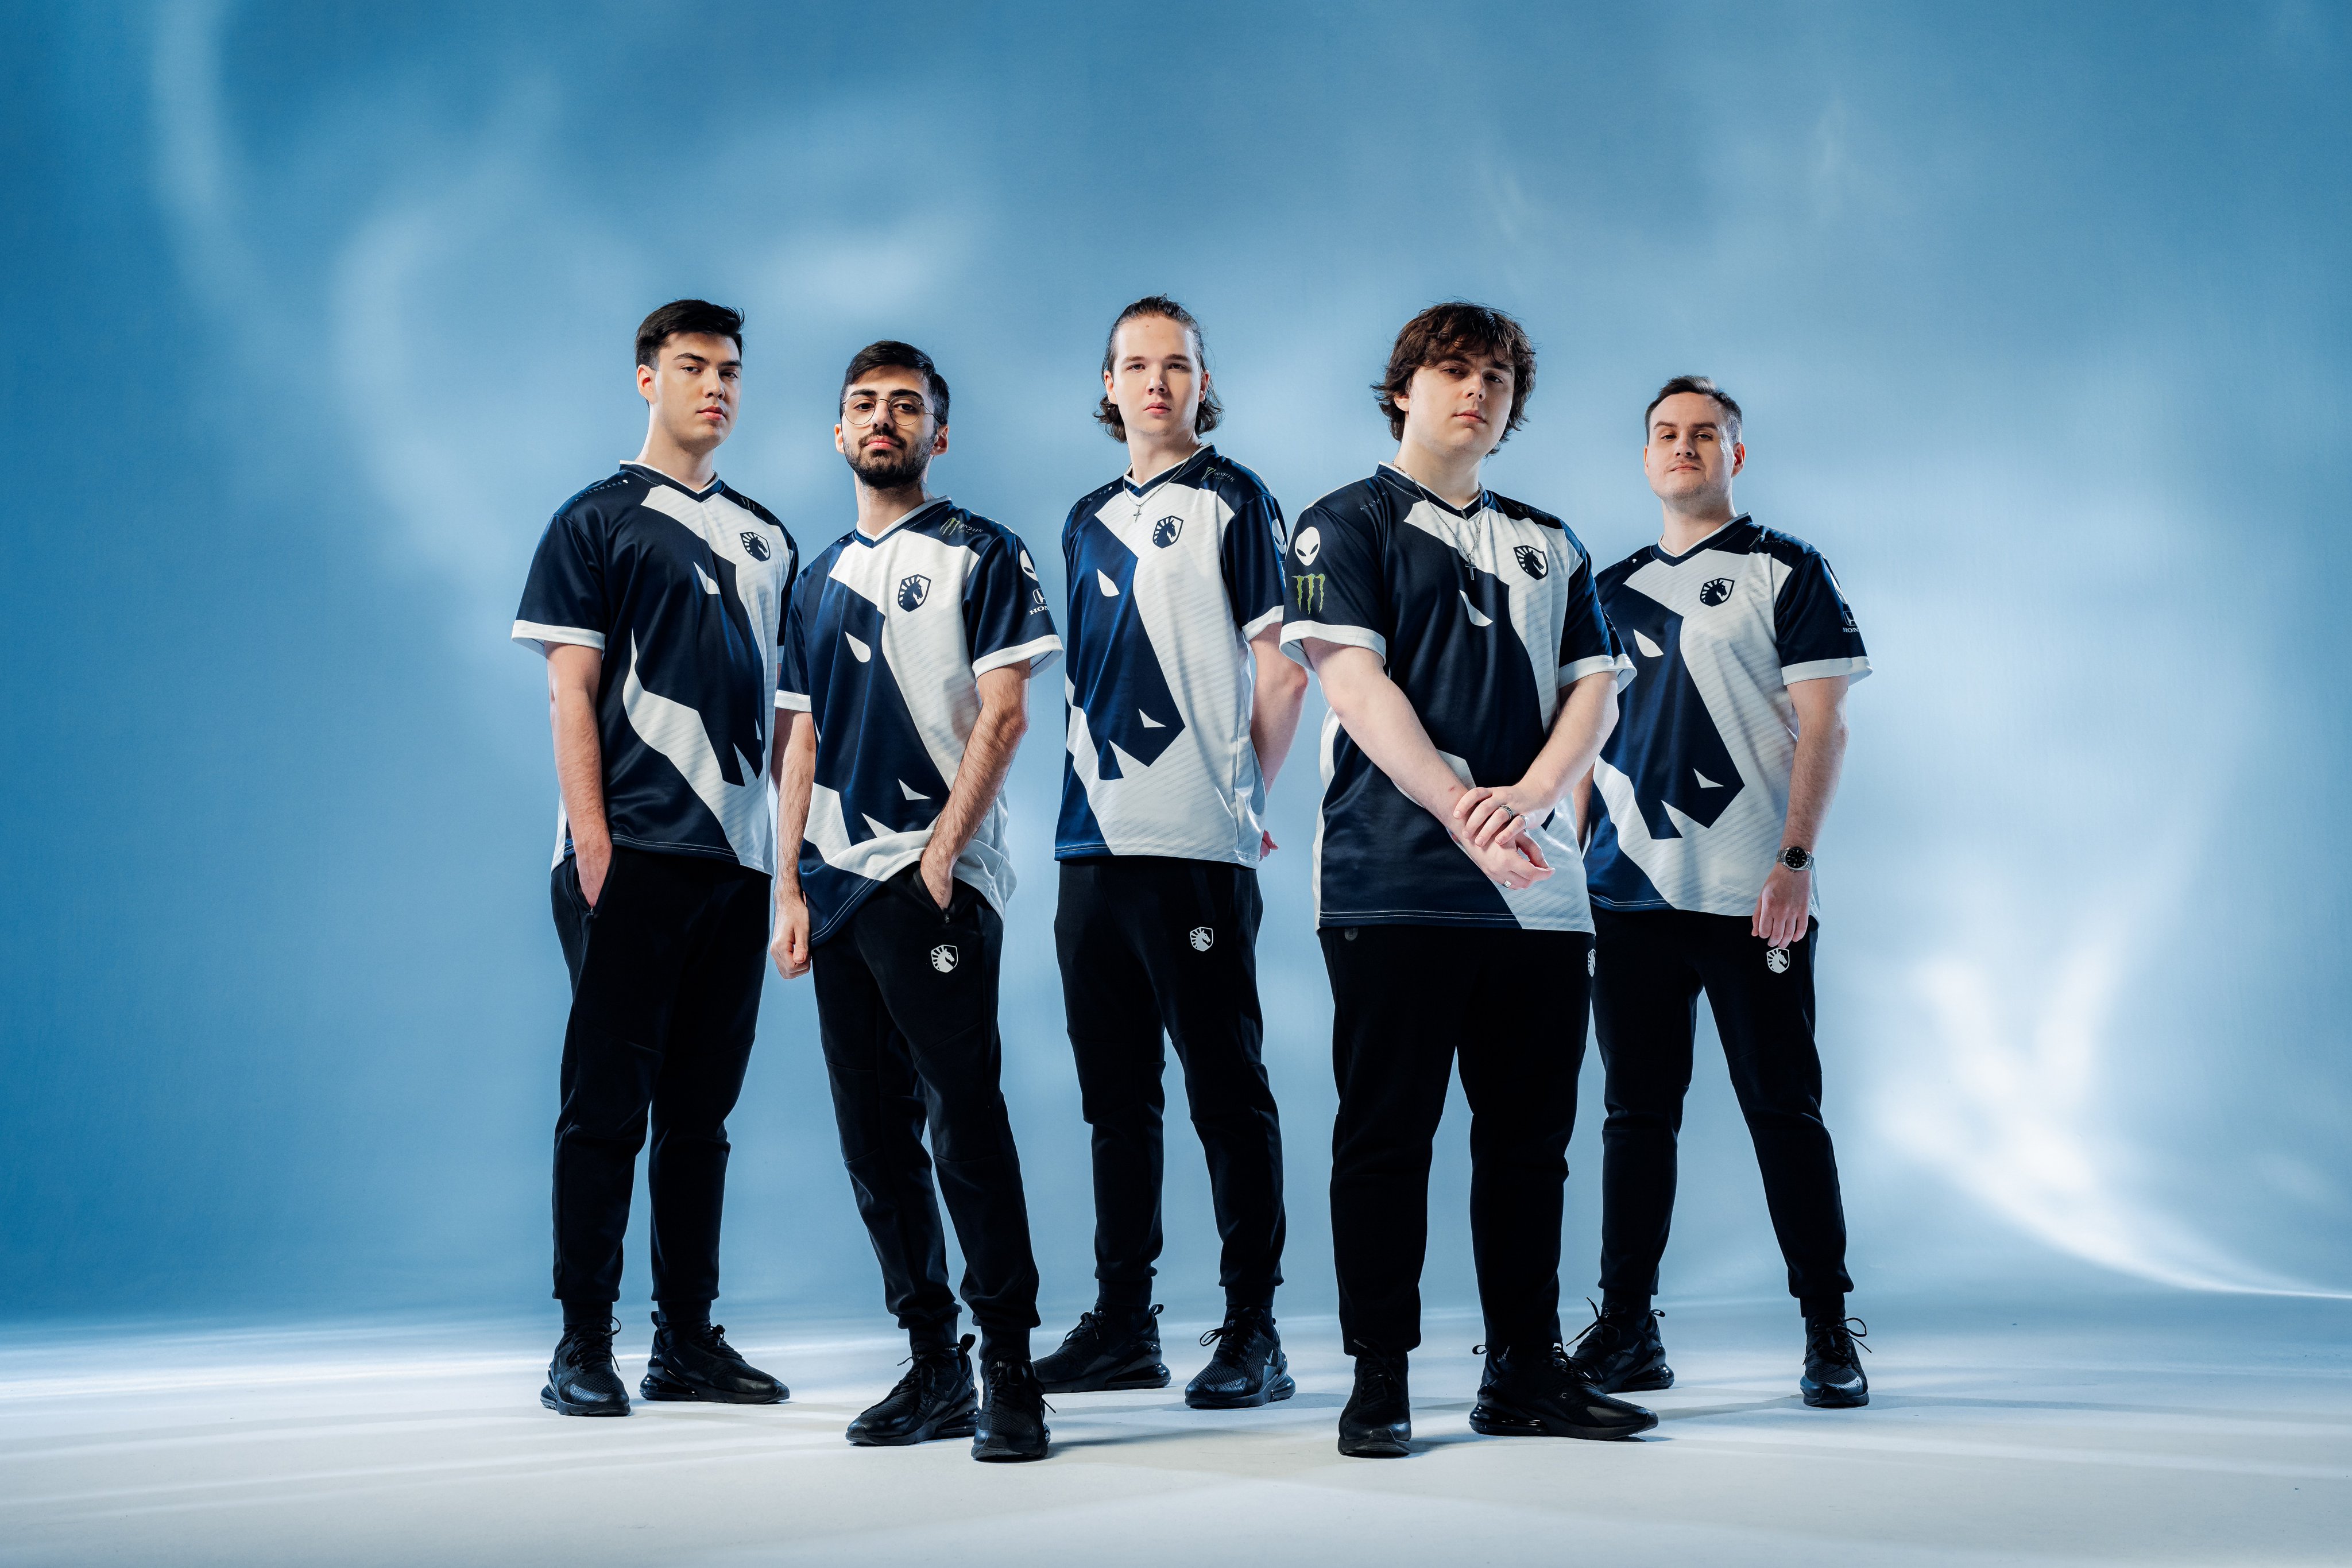 Team Liquid Valorant on Twitter: "Make insane clutches and feel like a real pro wearing the Team Liquid Official 2023 Jersey 🔥 Available Now https://t.co/7Nt3tfe5c5 https://t.co/YchL9KYTl8" / Twitter